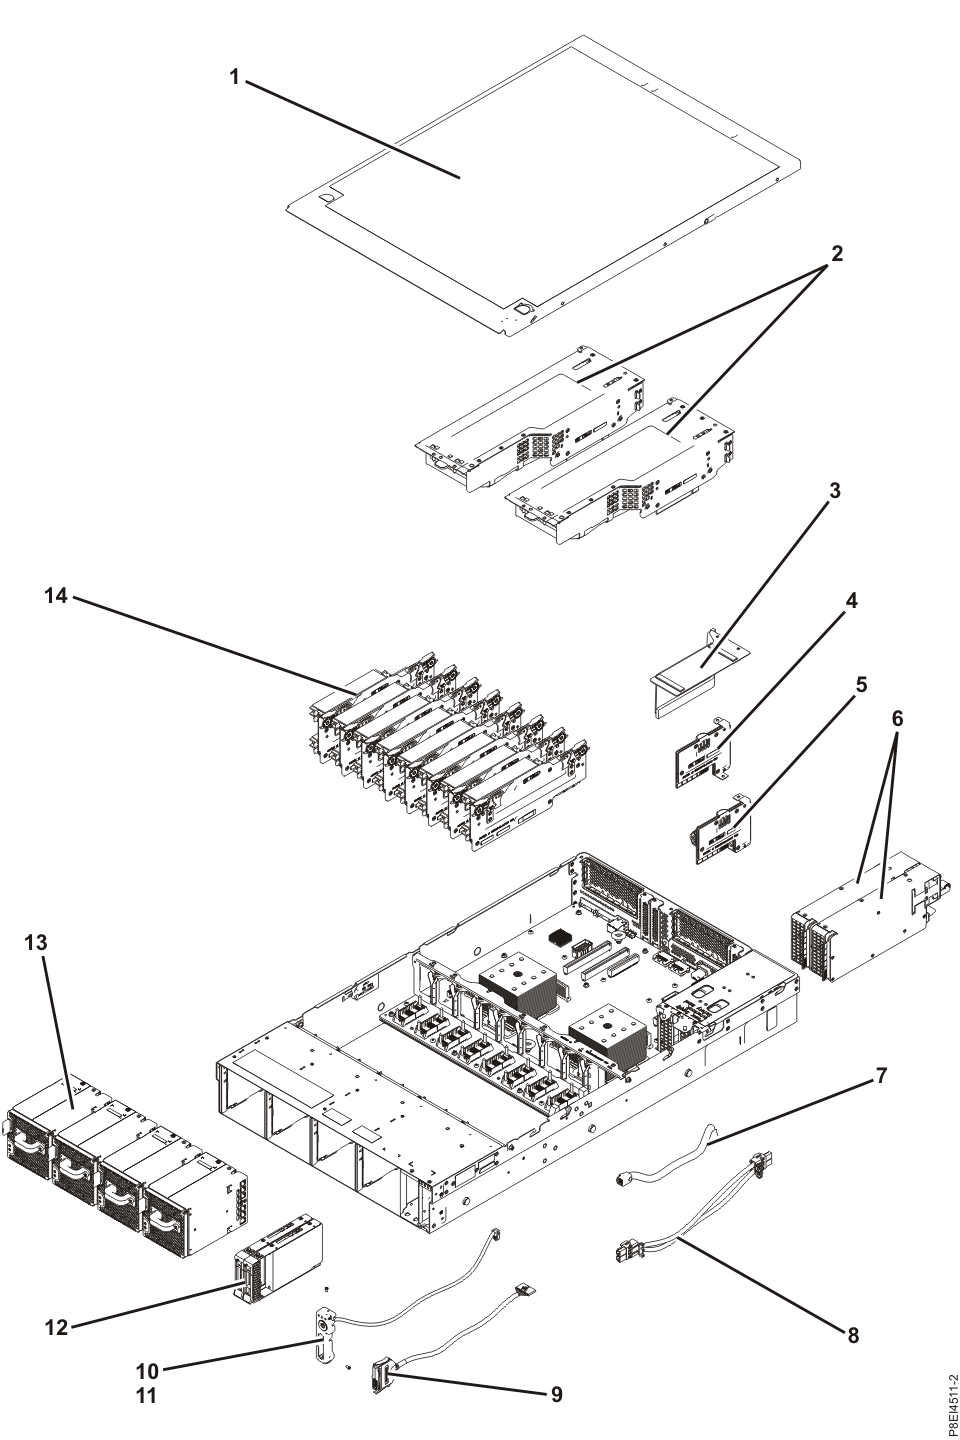 System parts